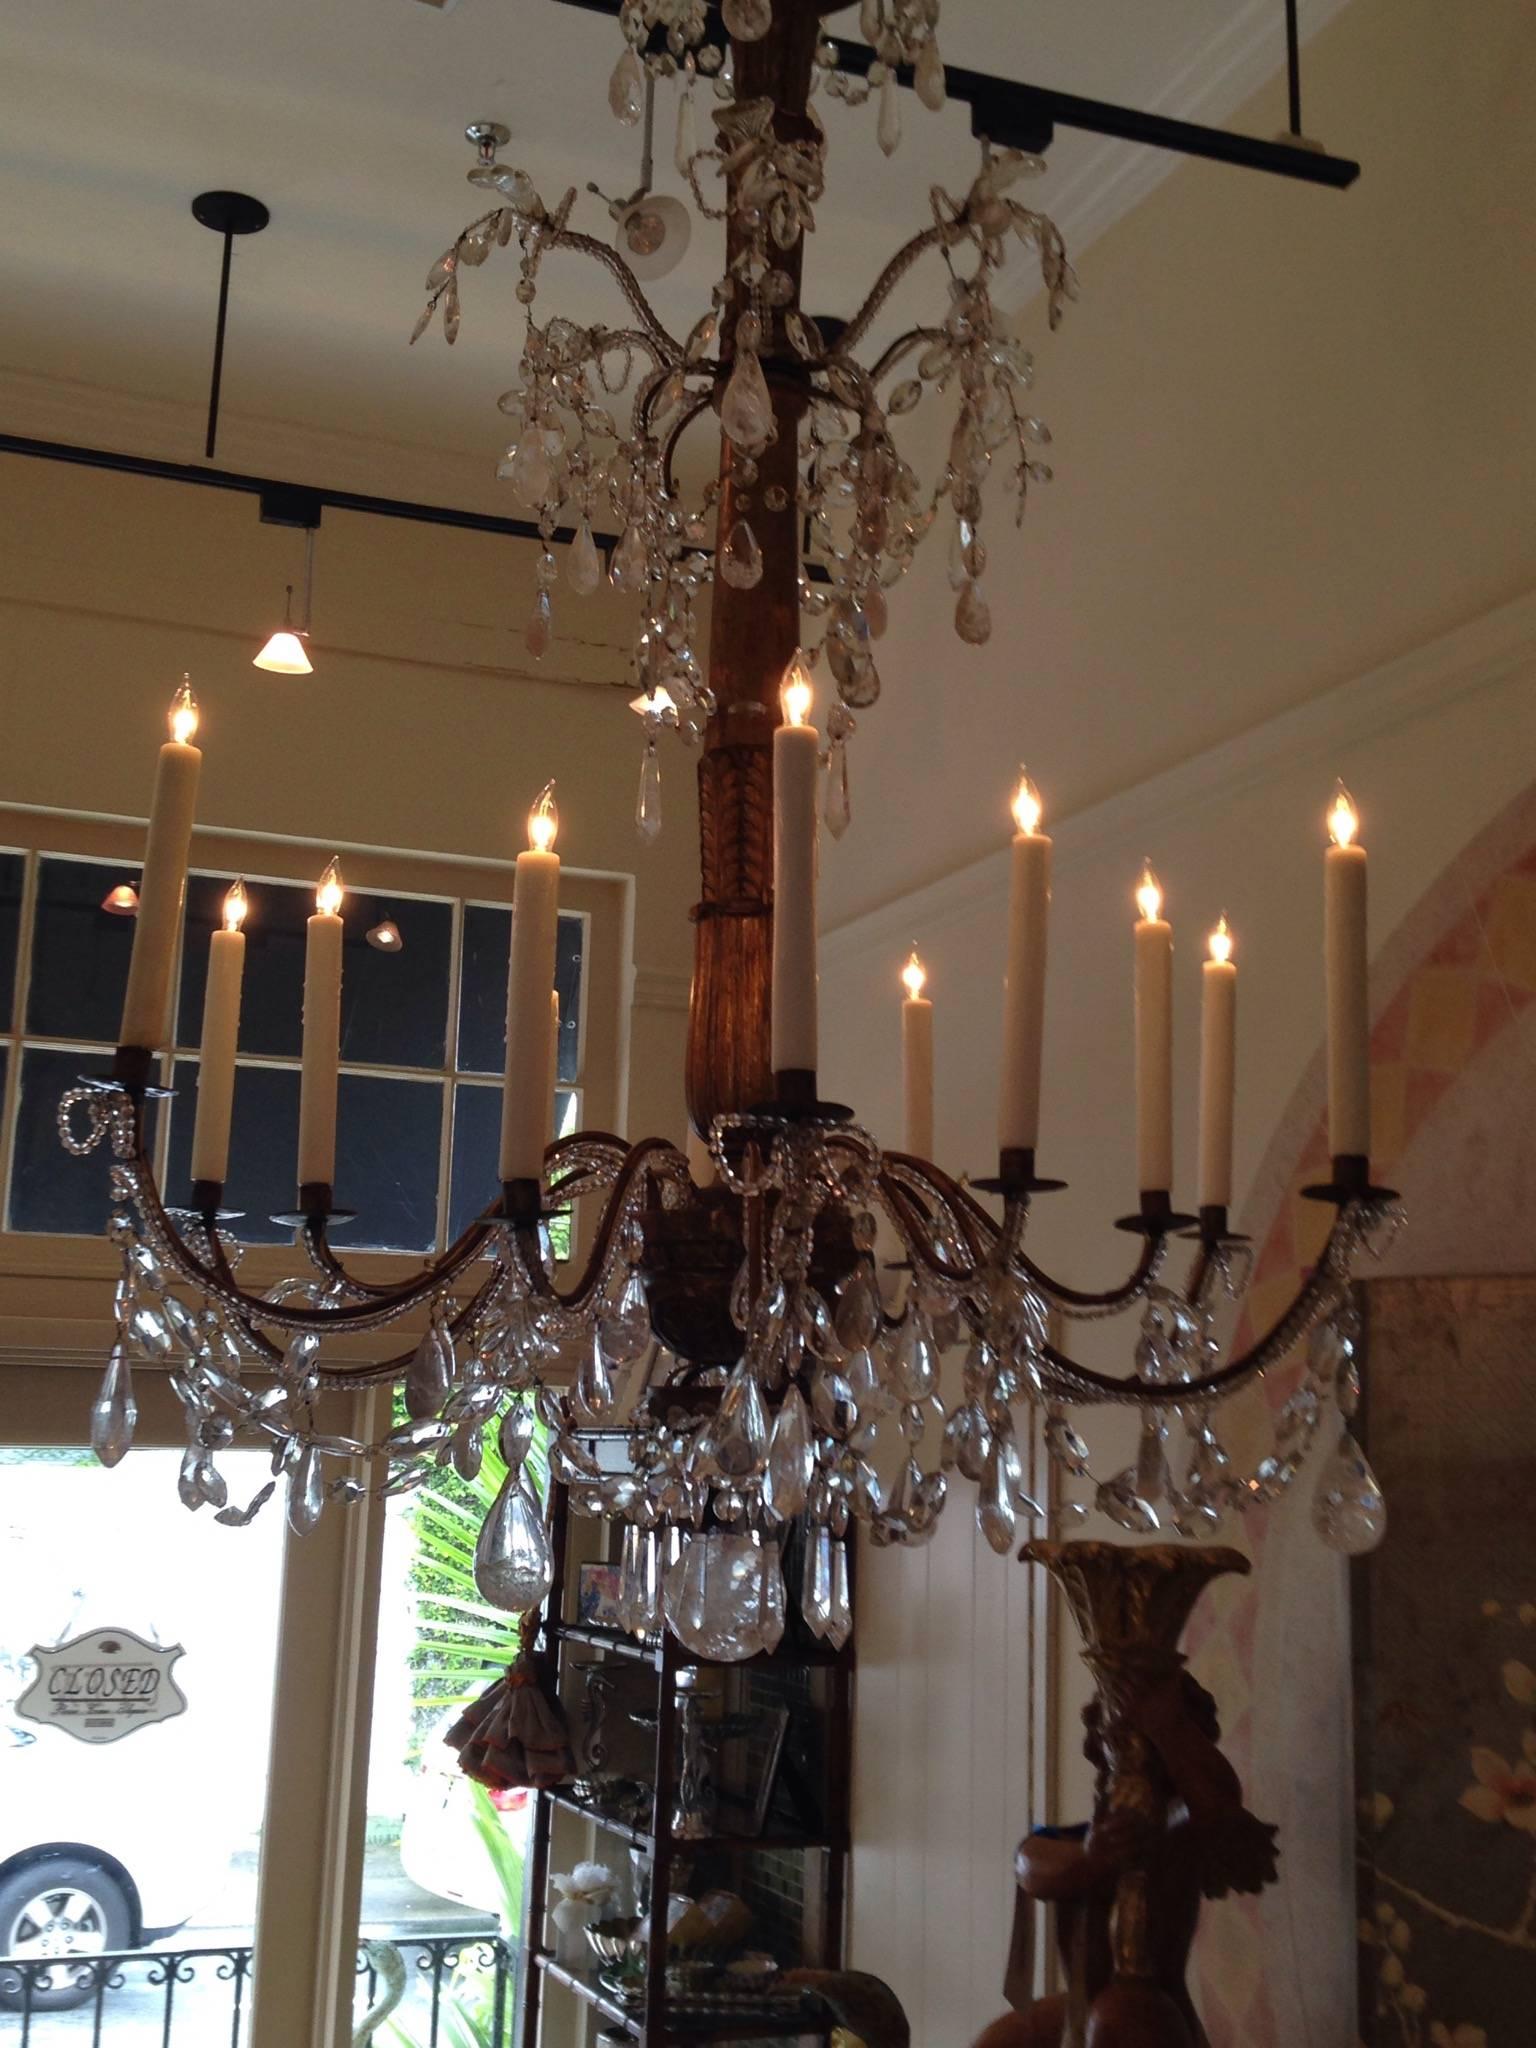 Late 18th-early 19th century colossal Genovese chandelier. Giltwood stem with 12 arms.
Rock crystal drops.